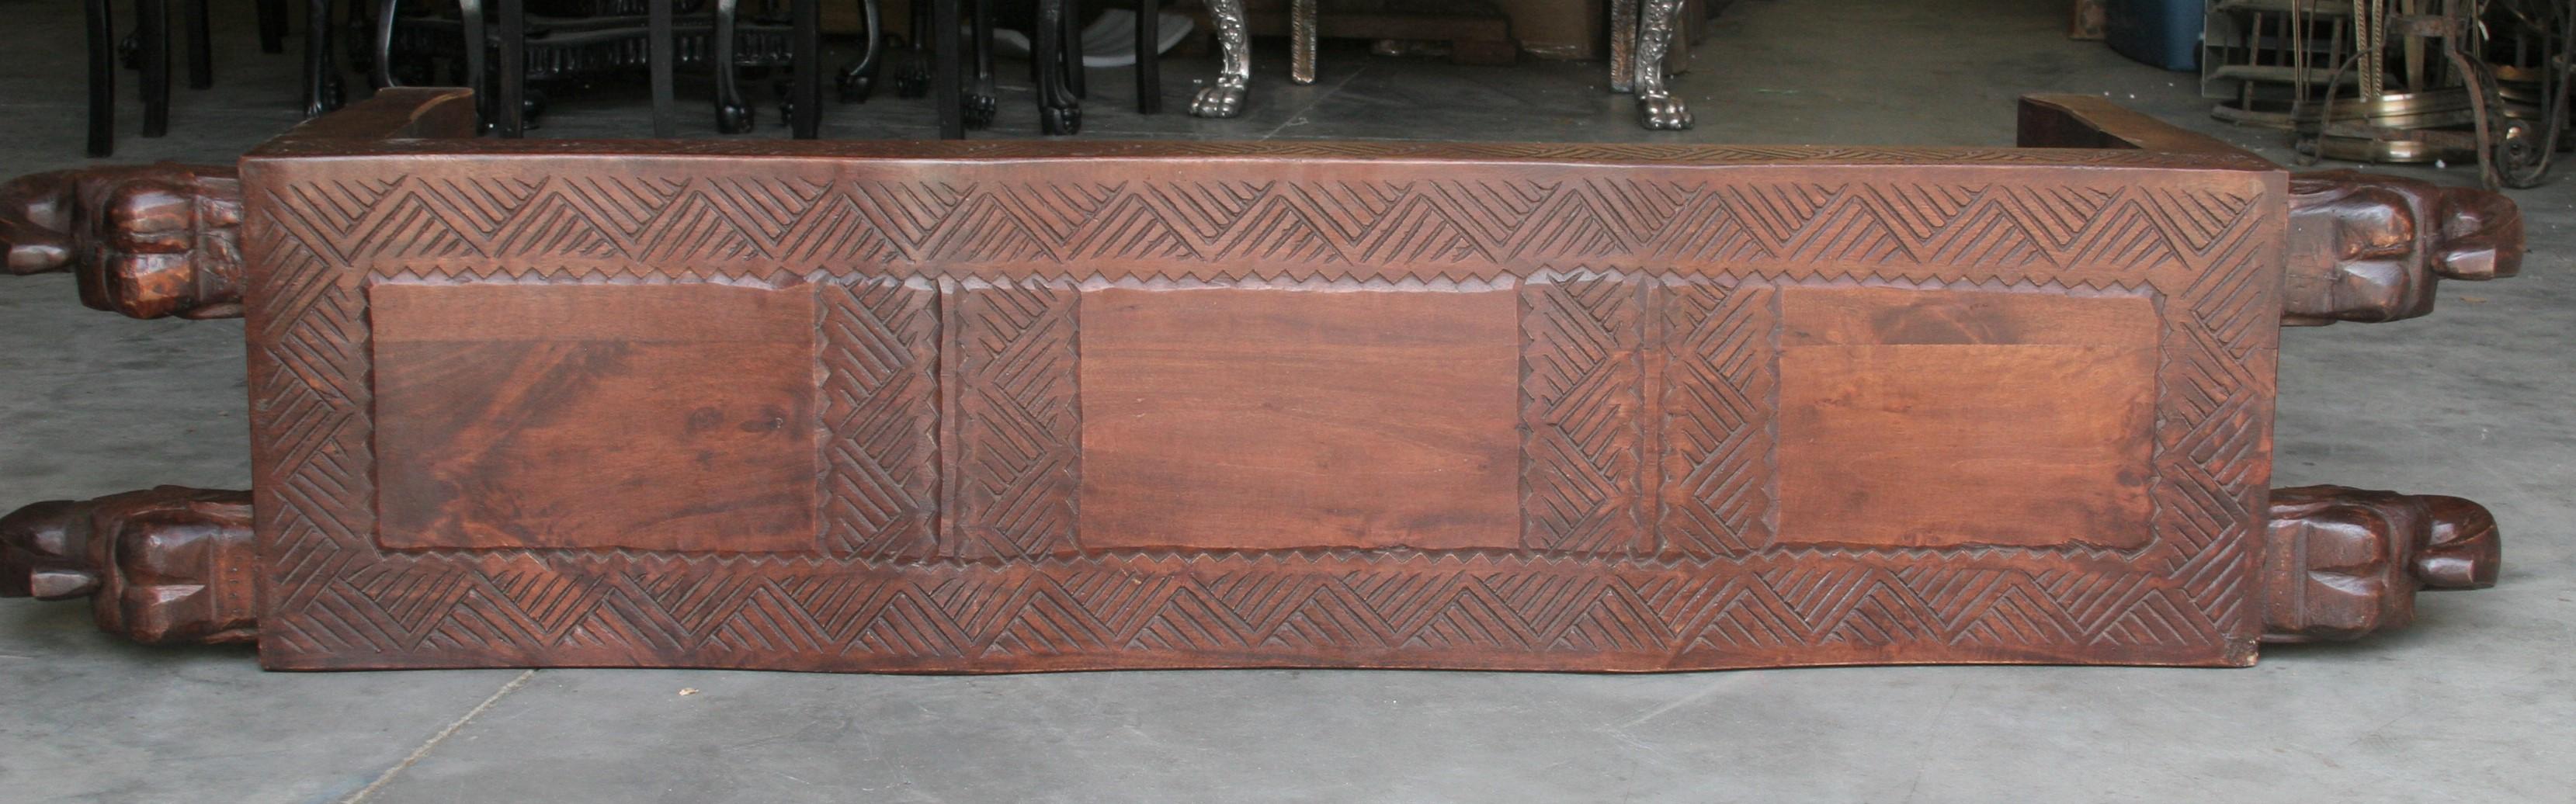 Midcentury Artistically Carved Thick Seat with Elephant Heads on Either Side For Sale 4